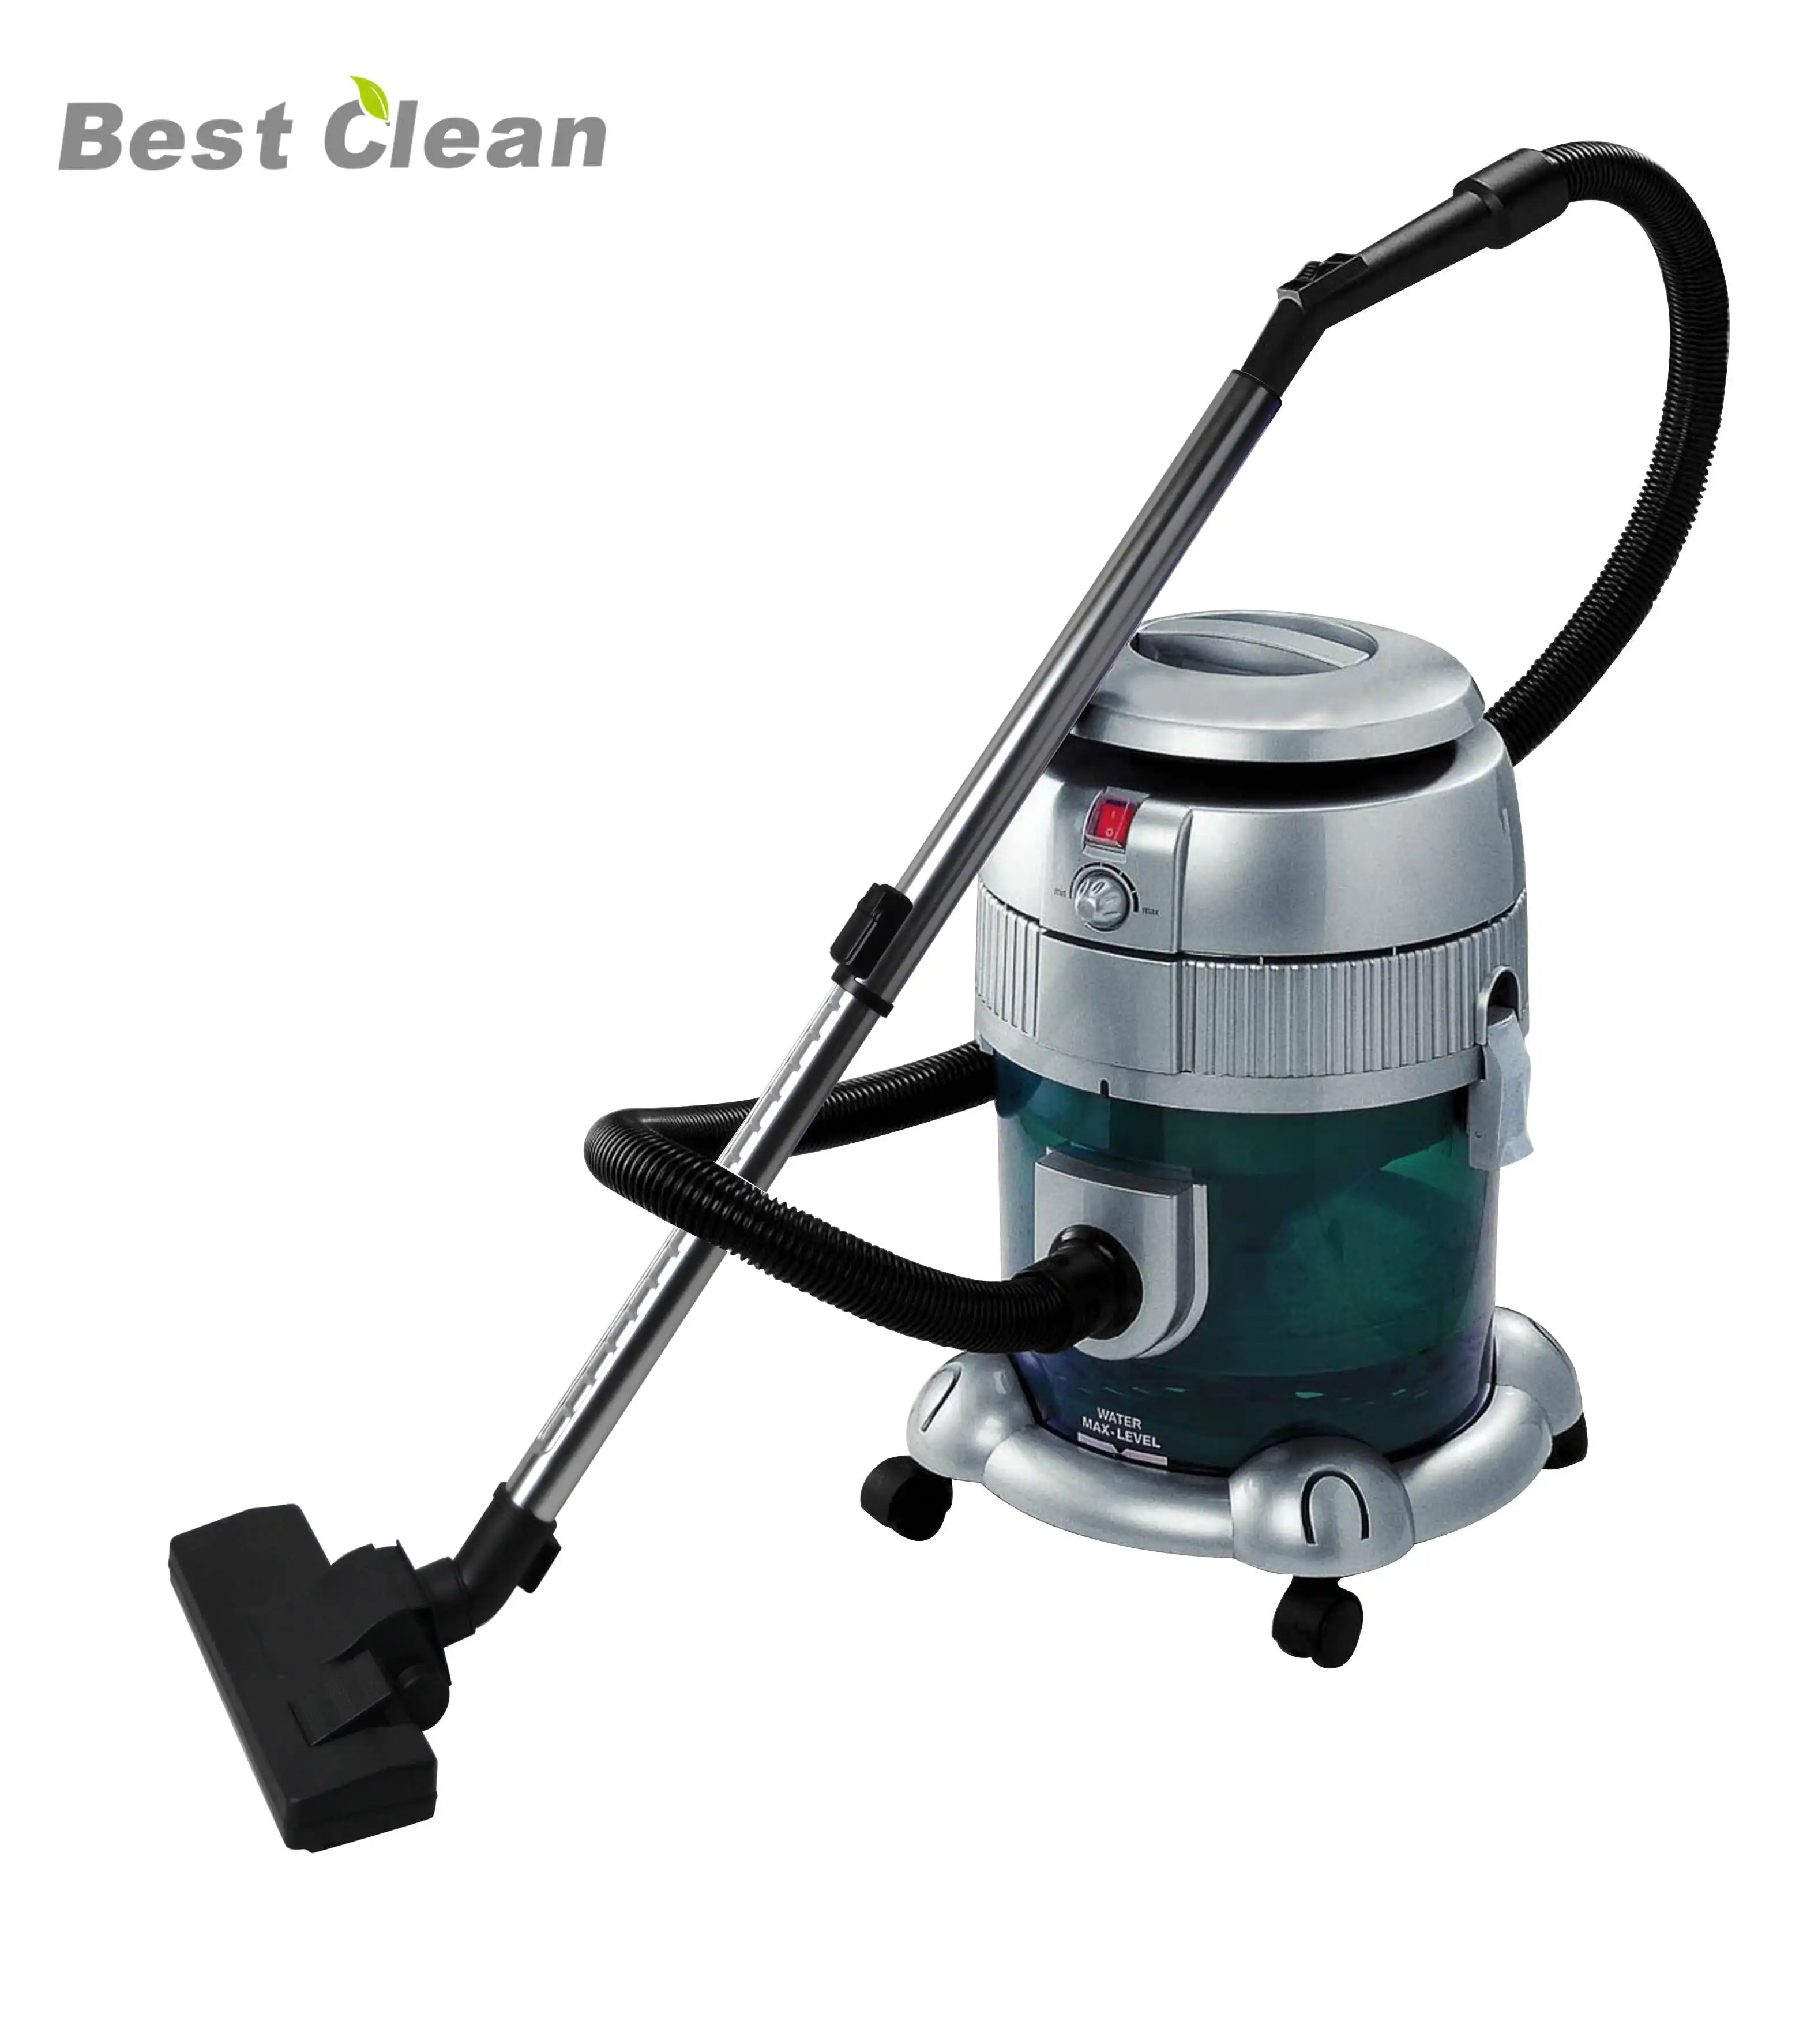 Vacuum Cleaner Manufacture Best Clean Strong Suction 20L Capacity Household Water Filtration Vacuum Cleaner Wet And Dry Commercial Use